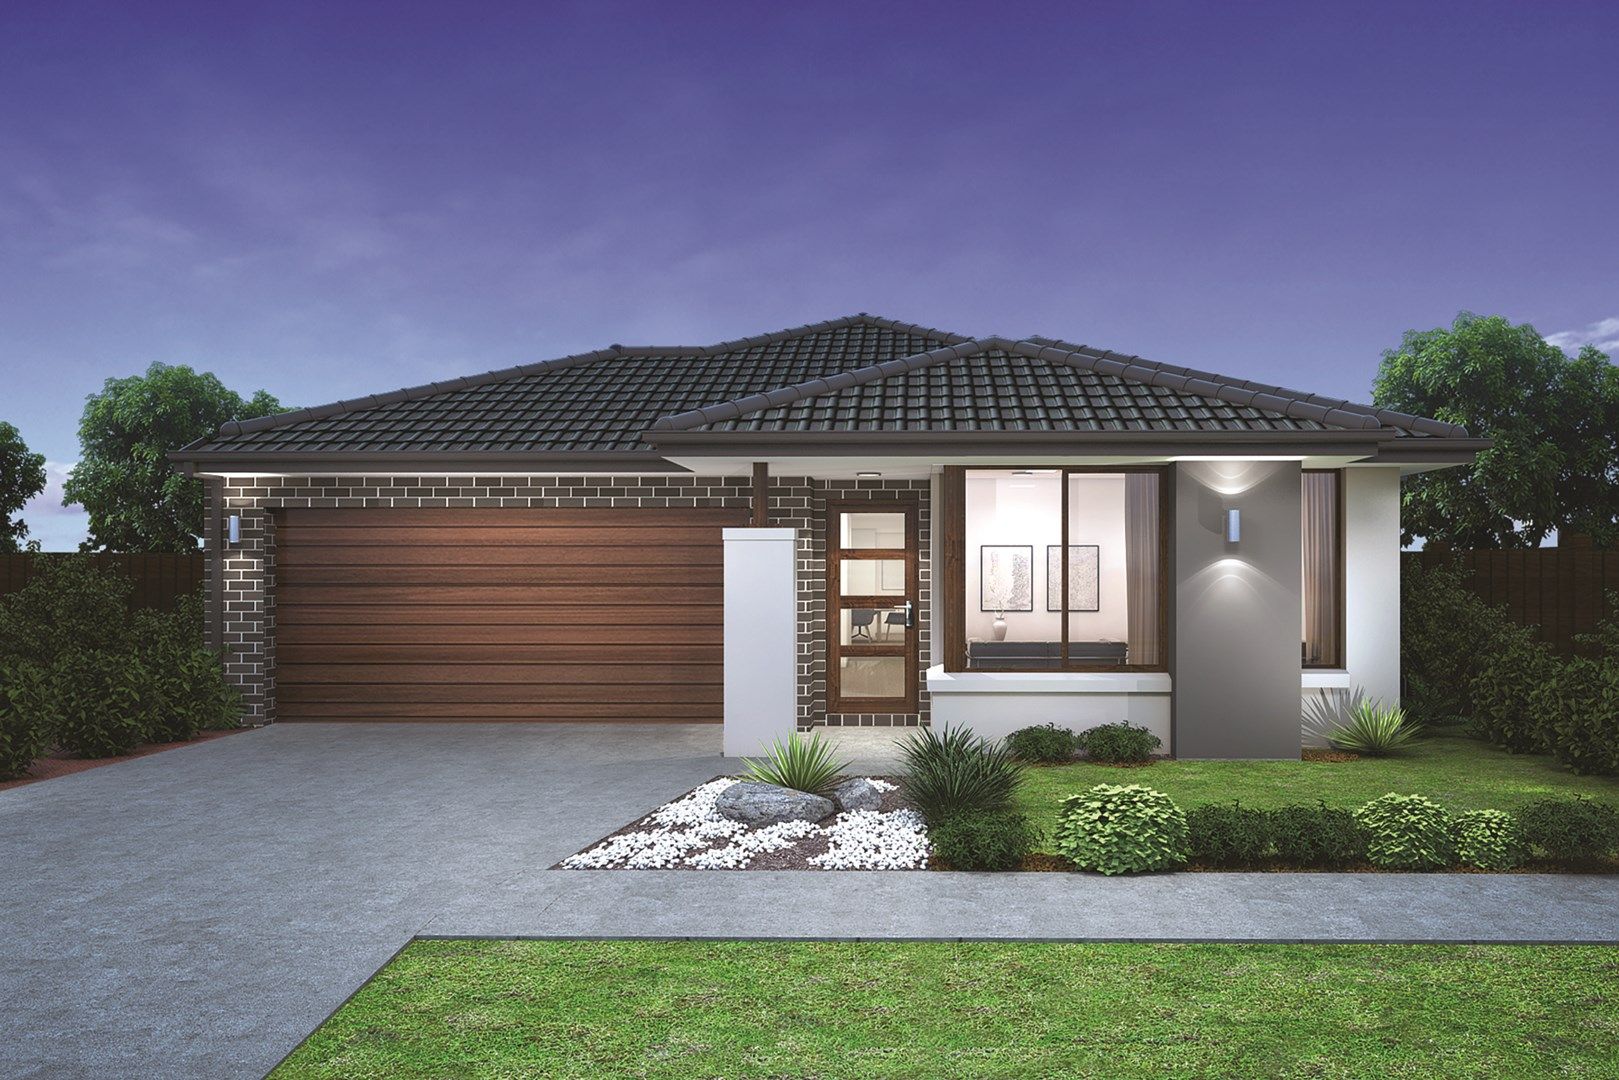 3 bedrooms New House & Land in Lot 346 Haymont Estate CHARLEMONT VIC, 3217